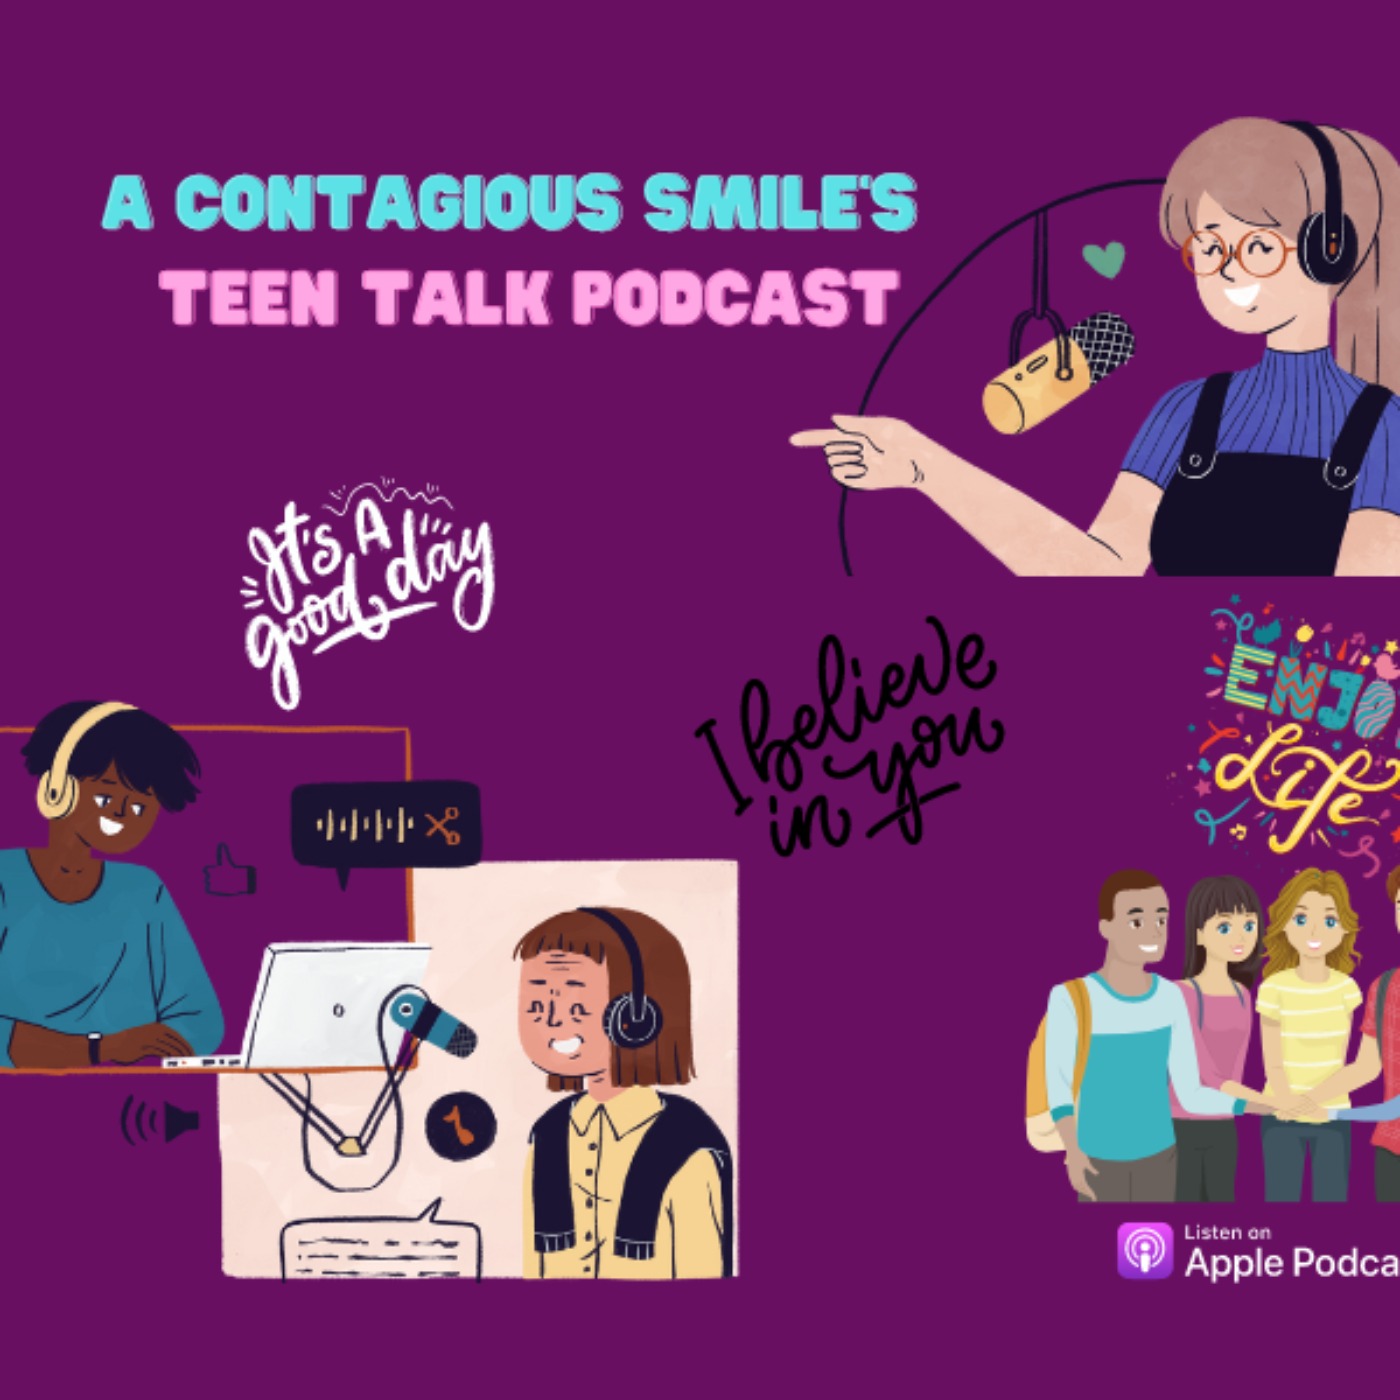 A Contagious Smile Brings to You a New Episode of Teen Talk